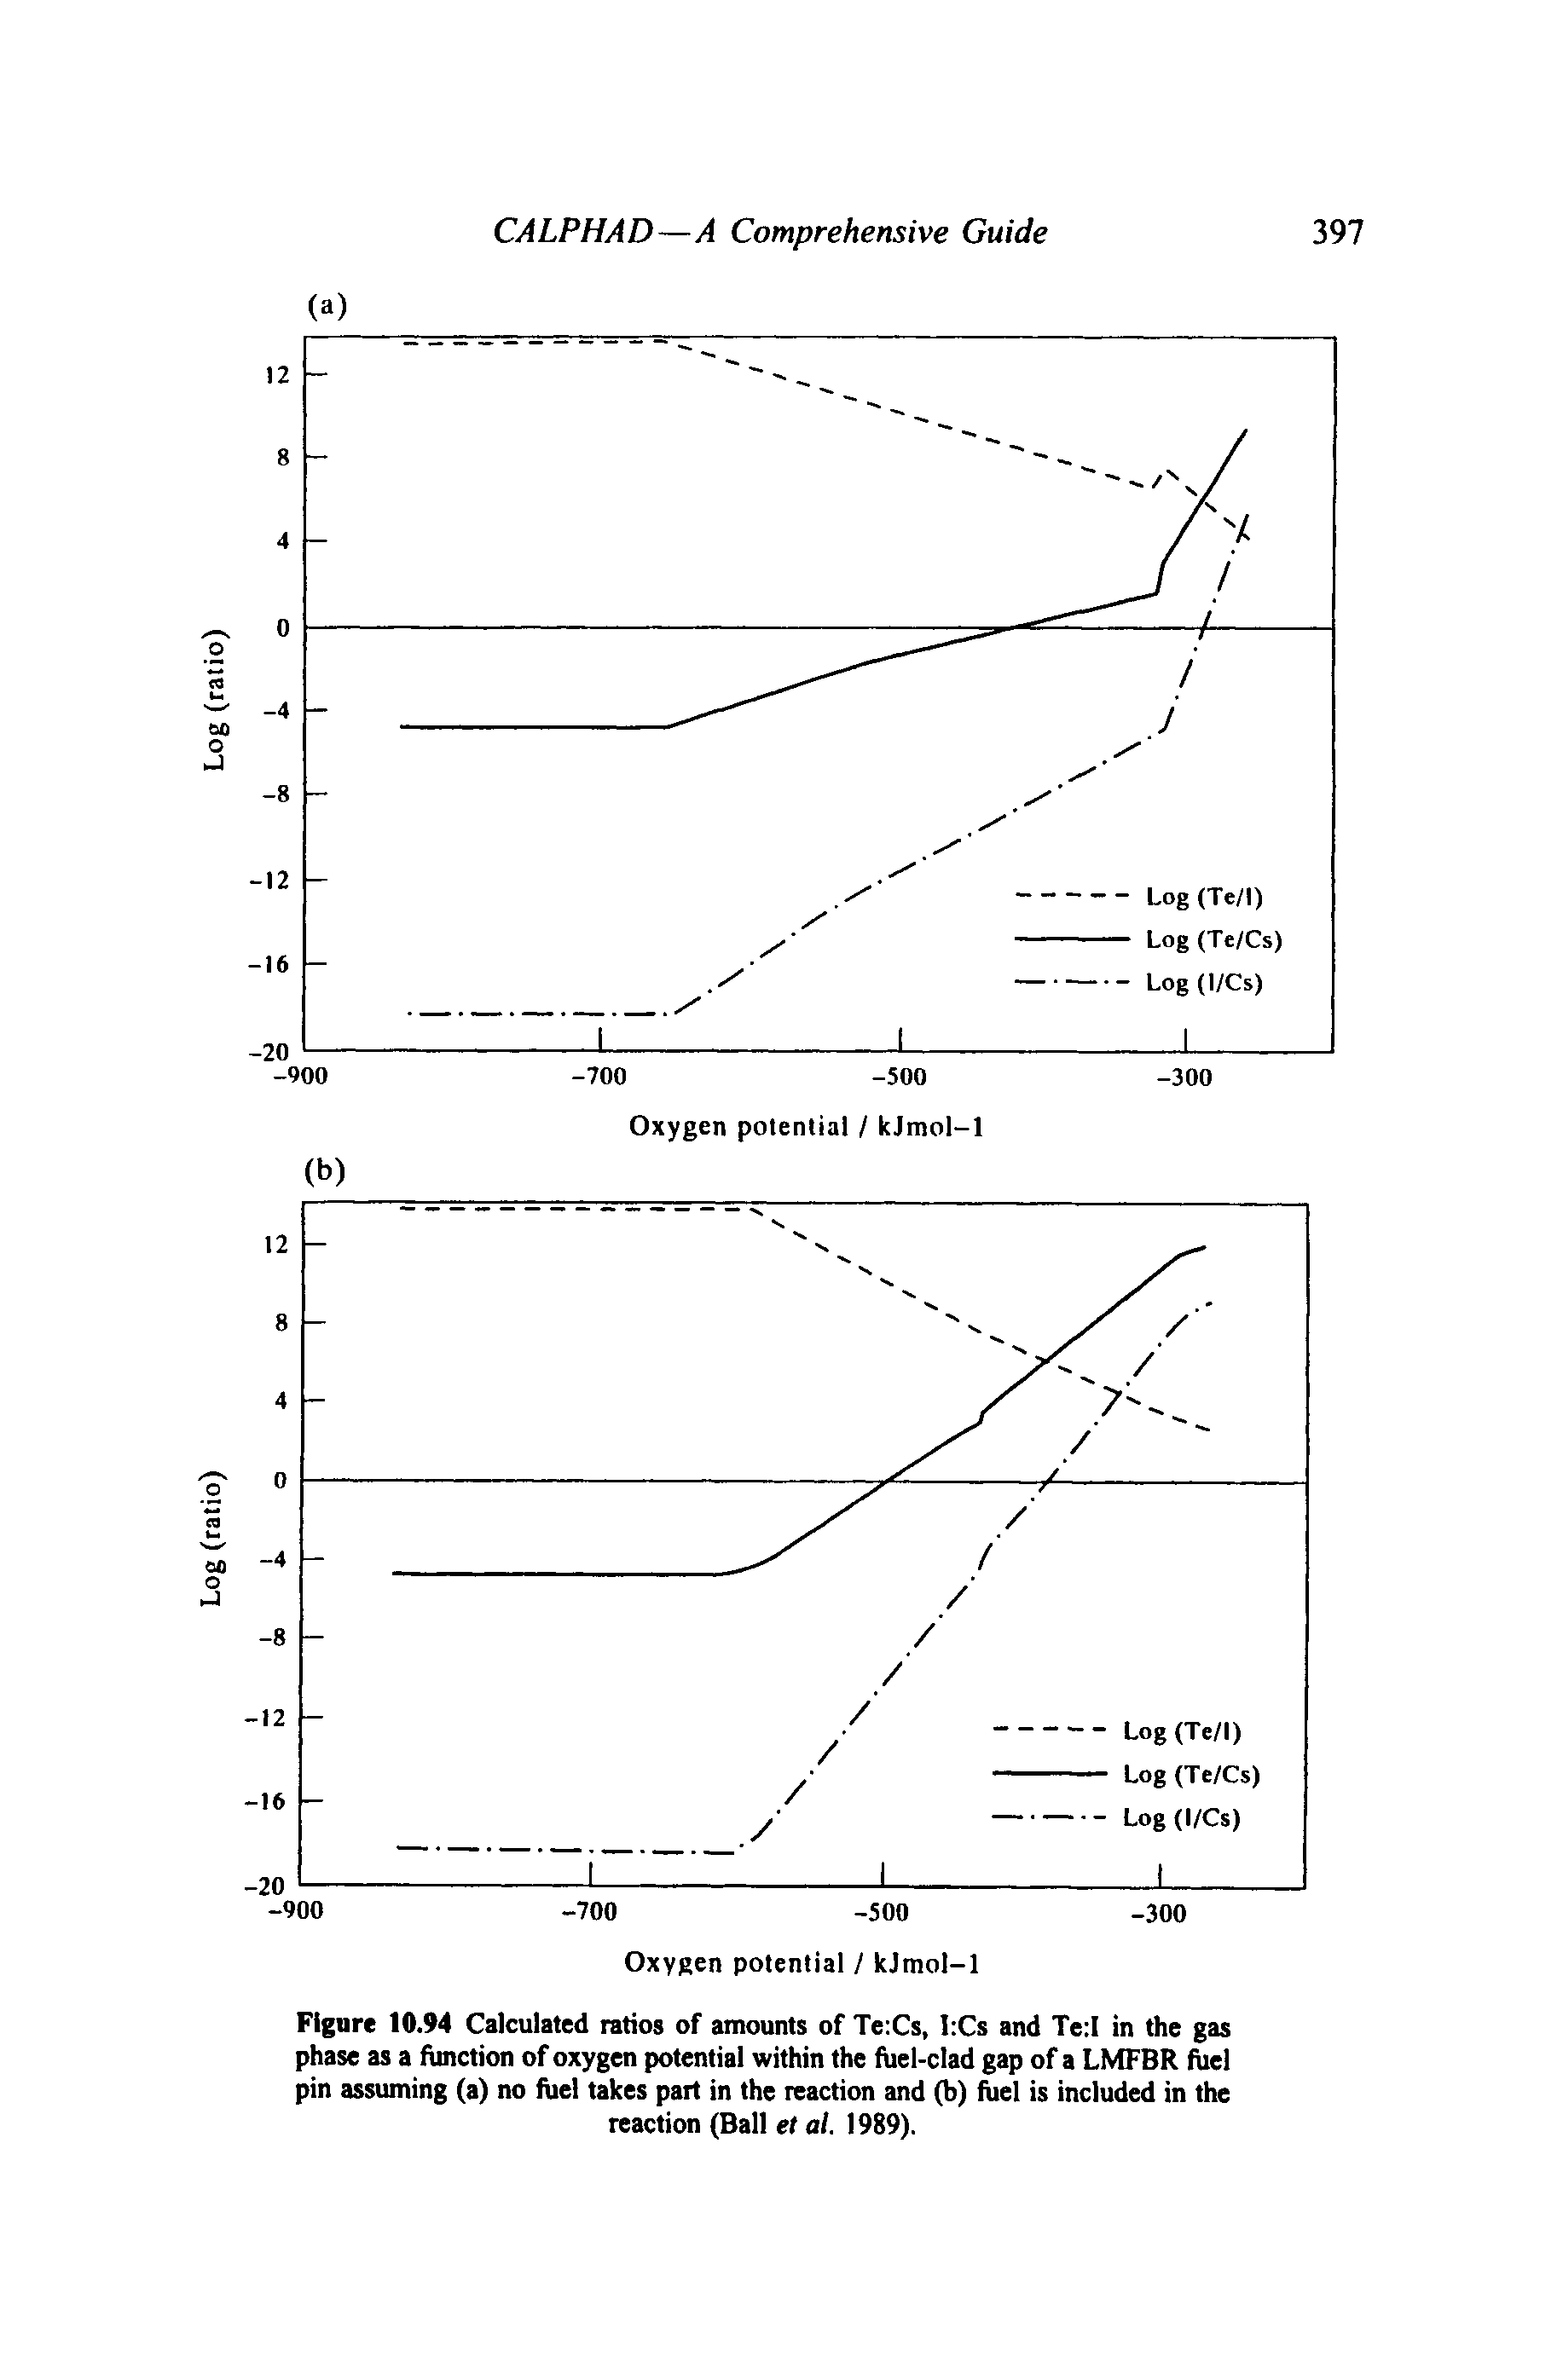 Figure 10.94 Calculated ratios of amounts of Te Cs, l Cs and Te I in the gas phase as a function of oxygen potential within the fiiel-clad gap of a LMFBR fuel pin assuming (a) no fuel takes part in the reaction and (b) fuel is included in the reaction (Ball et at. 1989).